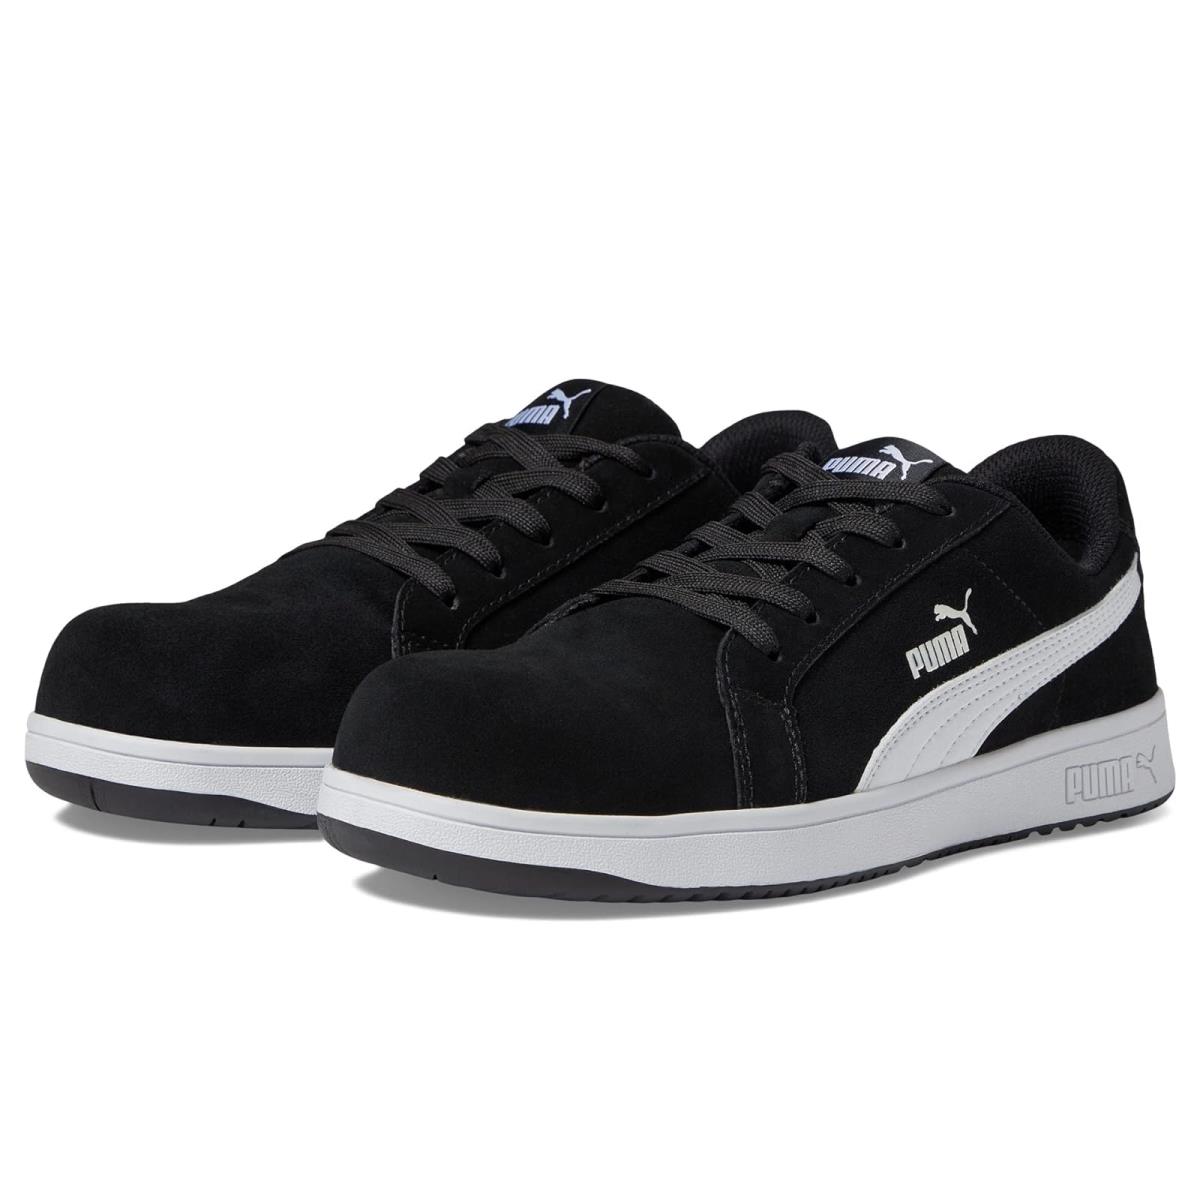 Woman`s Sneakers Athletic Shoes Puma Safety Iconic Suede Low Astm EH Black/White